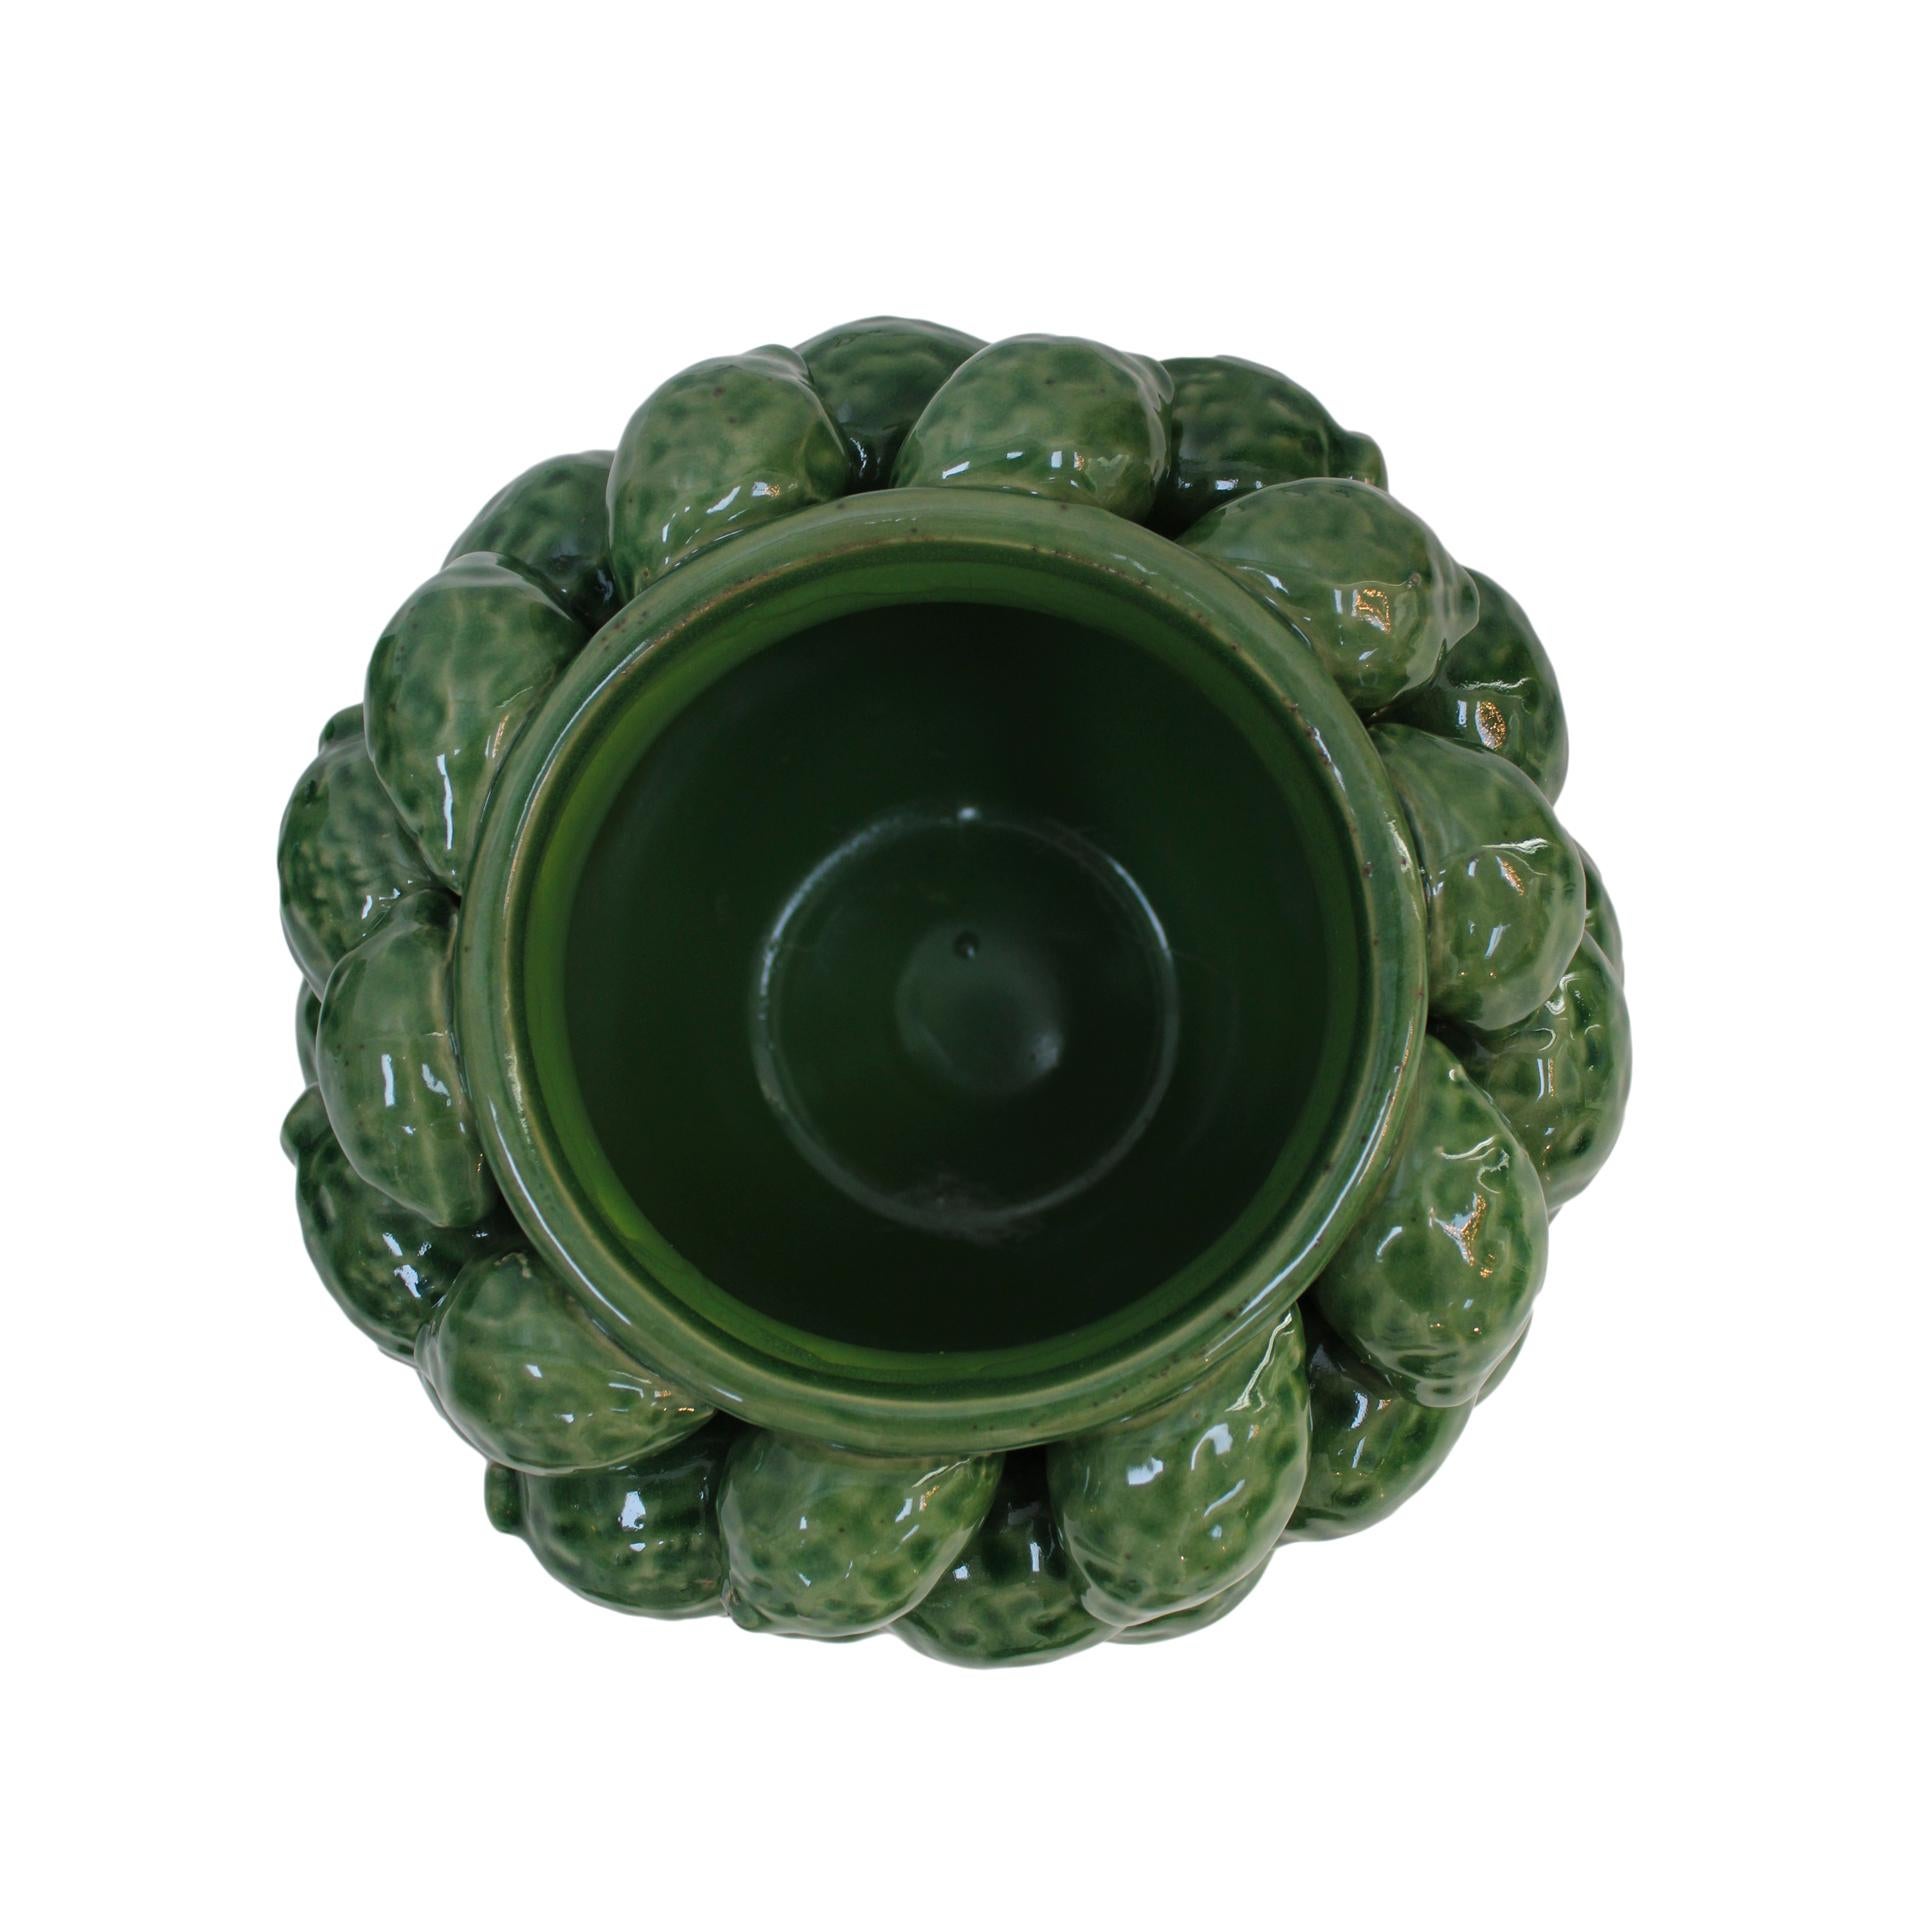 Contemporary Italian Green Ceramic Vase with Fruit Motifs In Good Condition For Sale In Ibiza, Spain